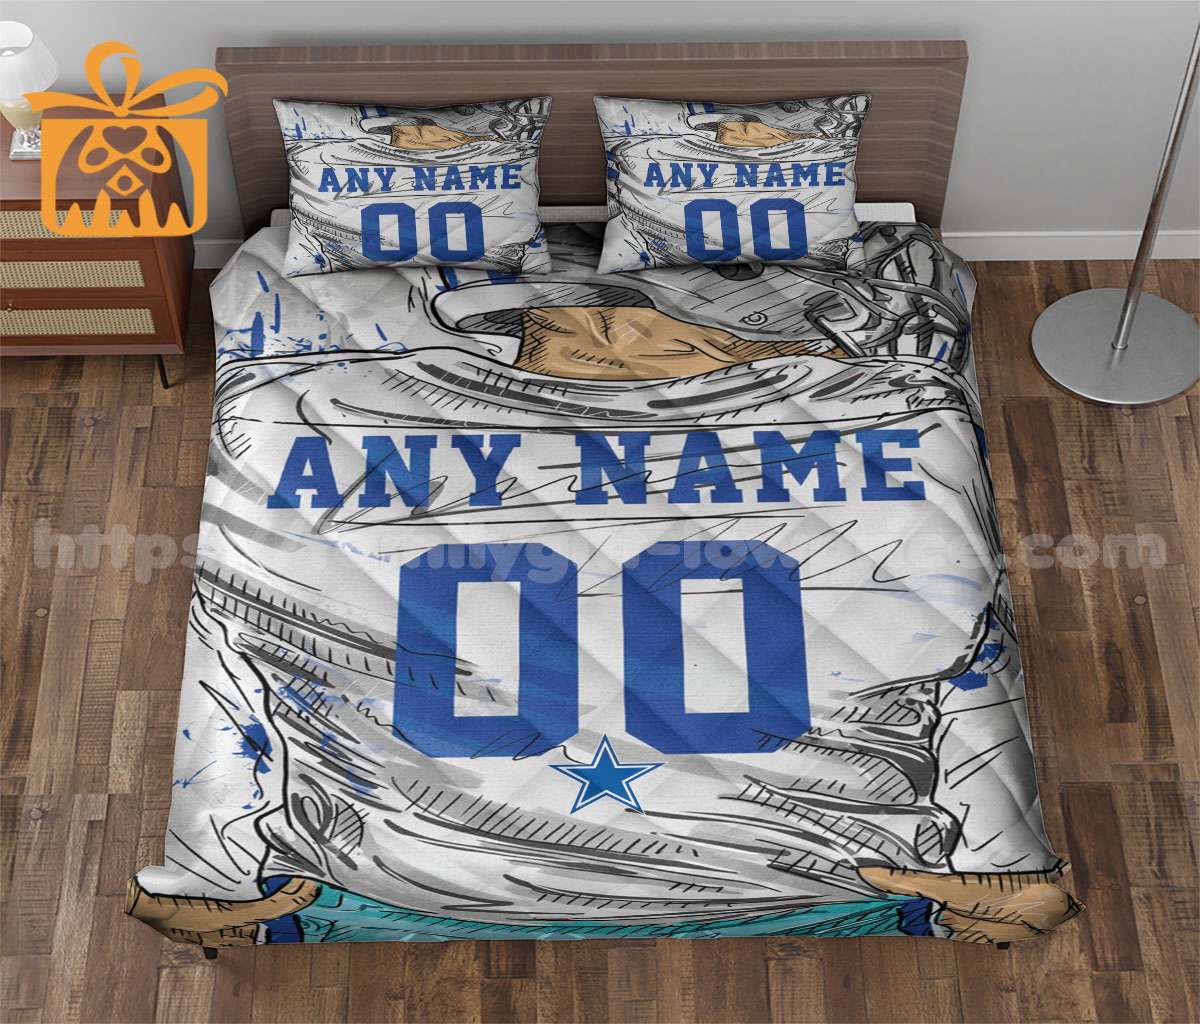 Dallas Cowboy Jerseys Quilt Bedding Sets, Cowboys Gifts, Personalized NFL Jerseys with Your Name & Number